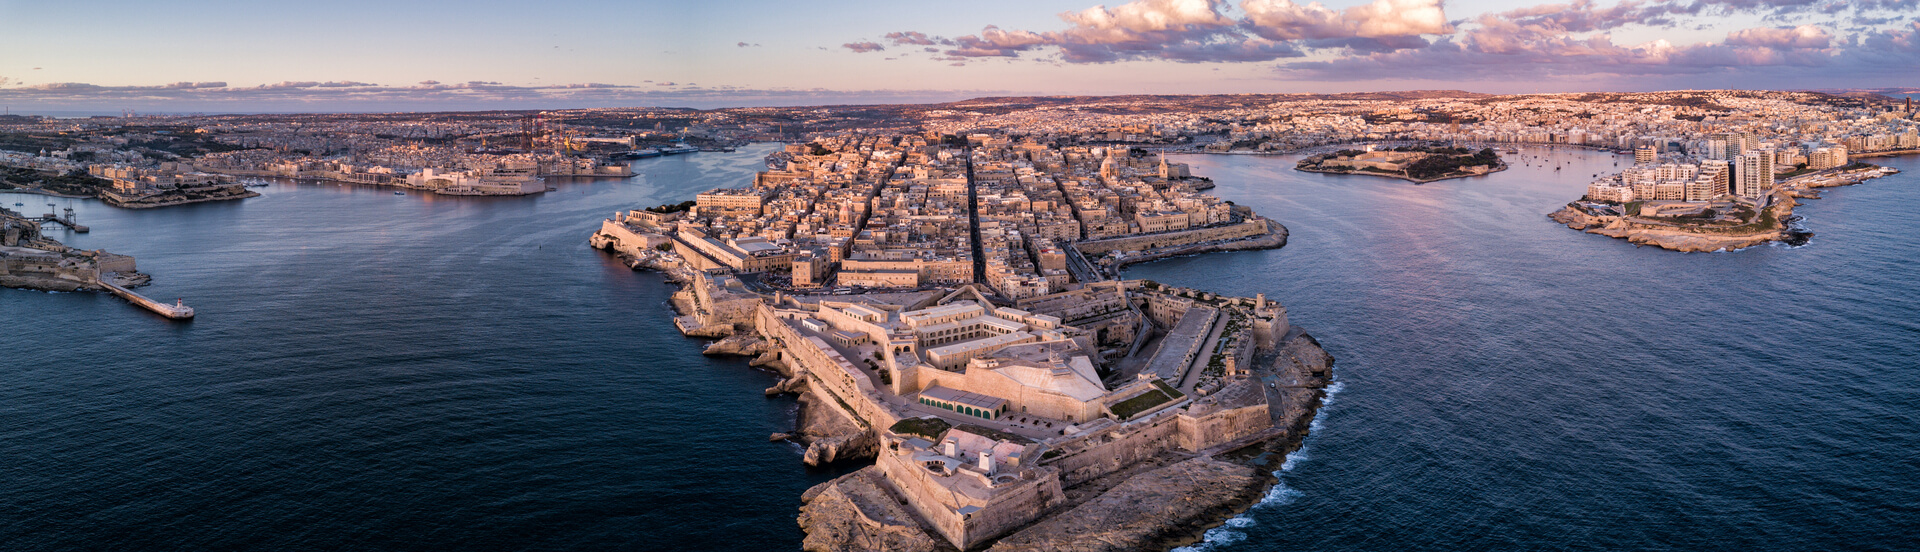 Aerial drone panorama sunrise photo - Ancient capital city of Valletta Malta. Island Country of Europe in the Mediterranean Sea